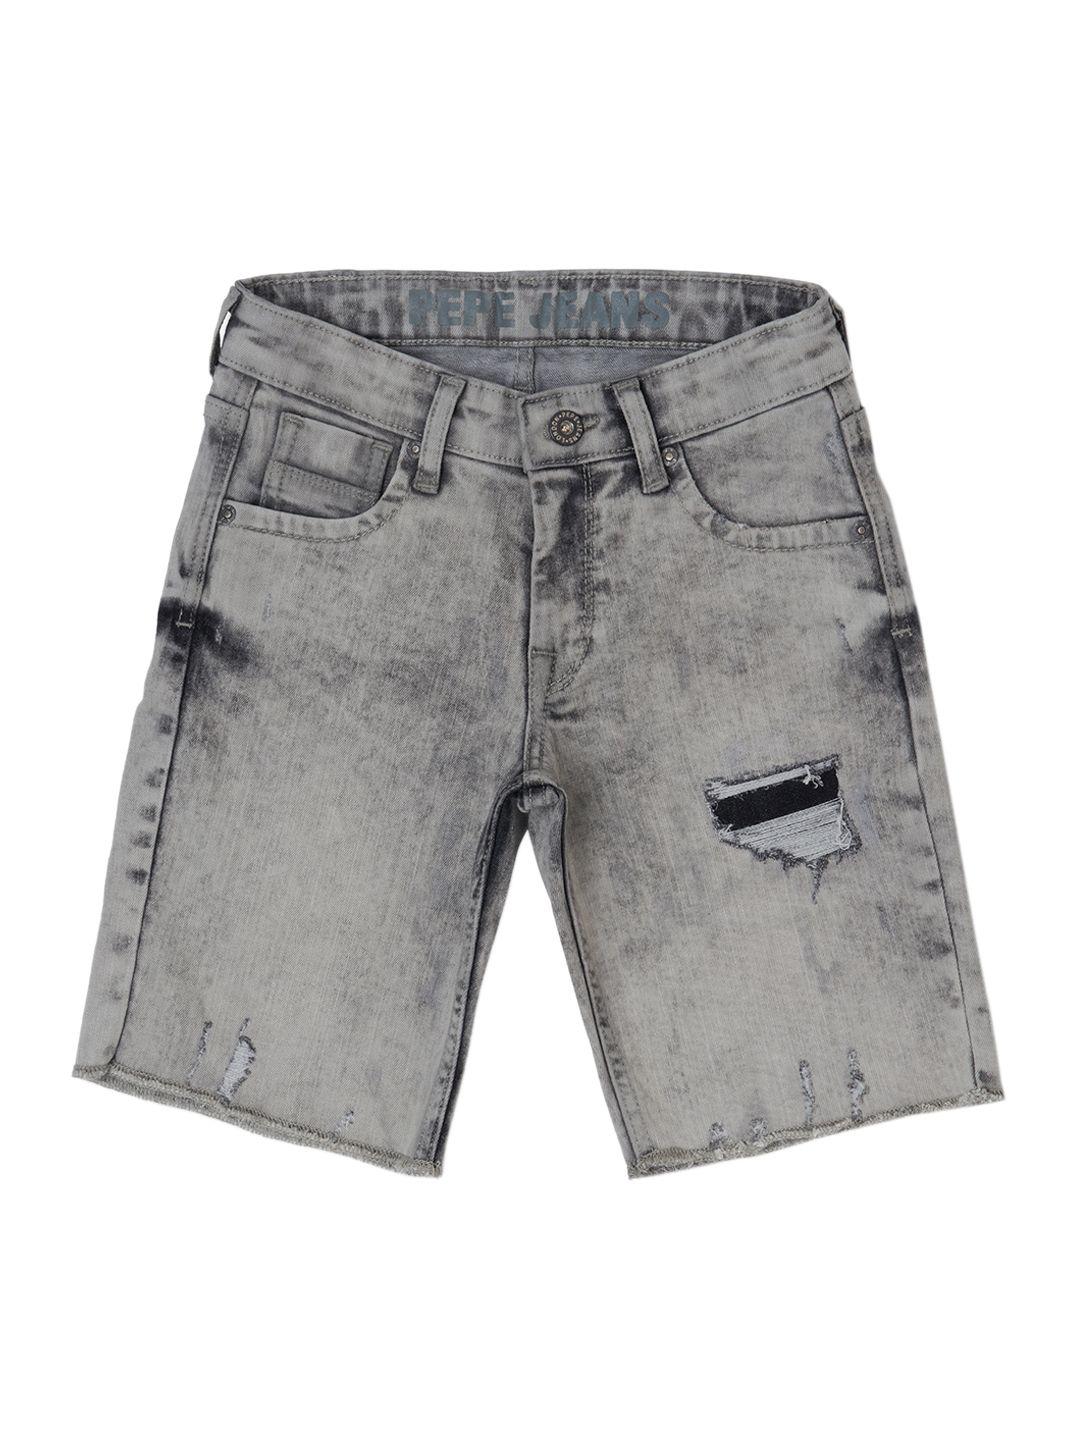 pepe jeans boys charcoal grey washed slim fit distressed denim shorts